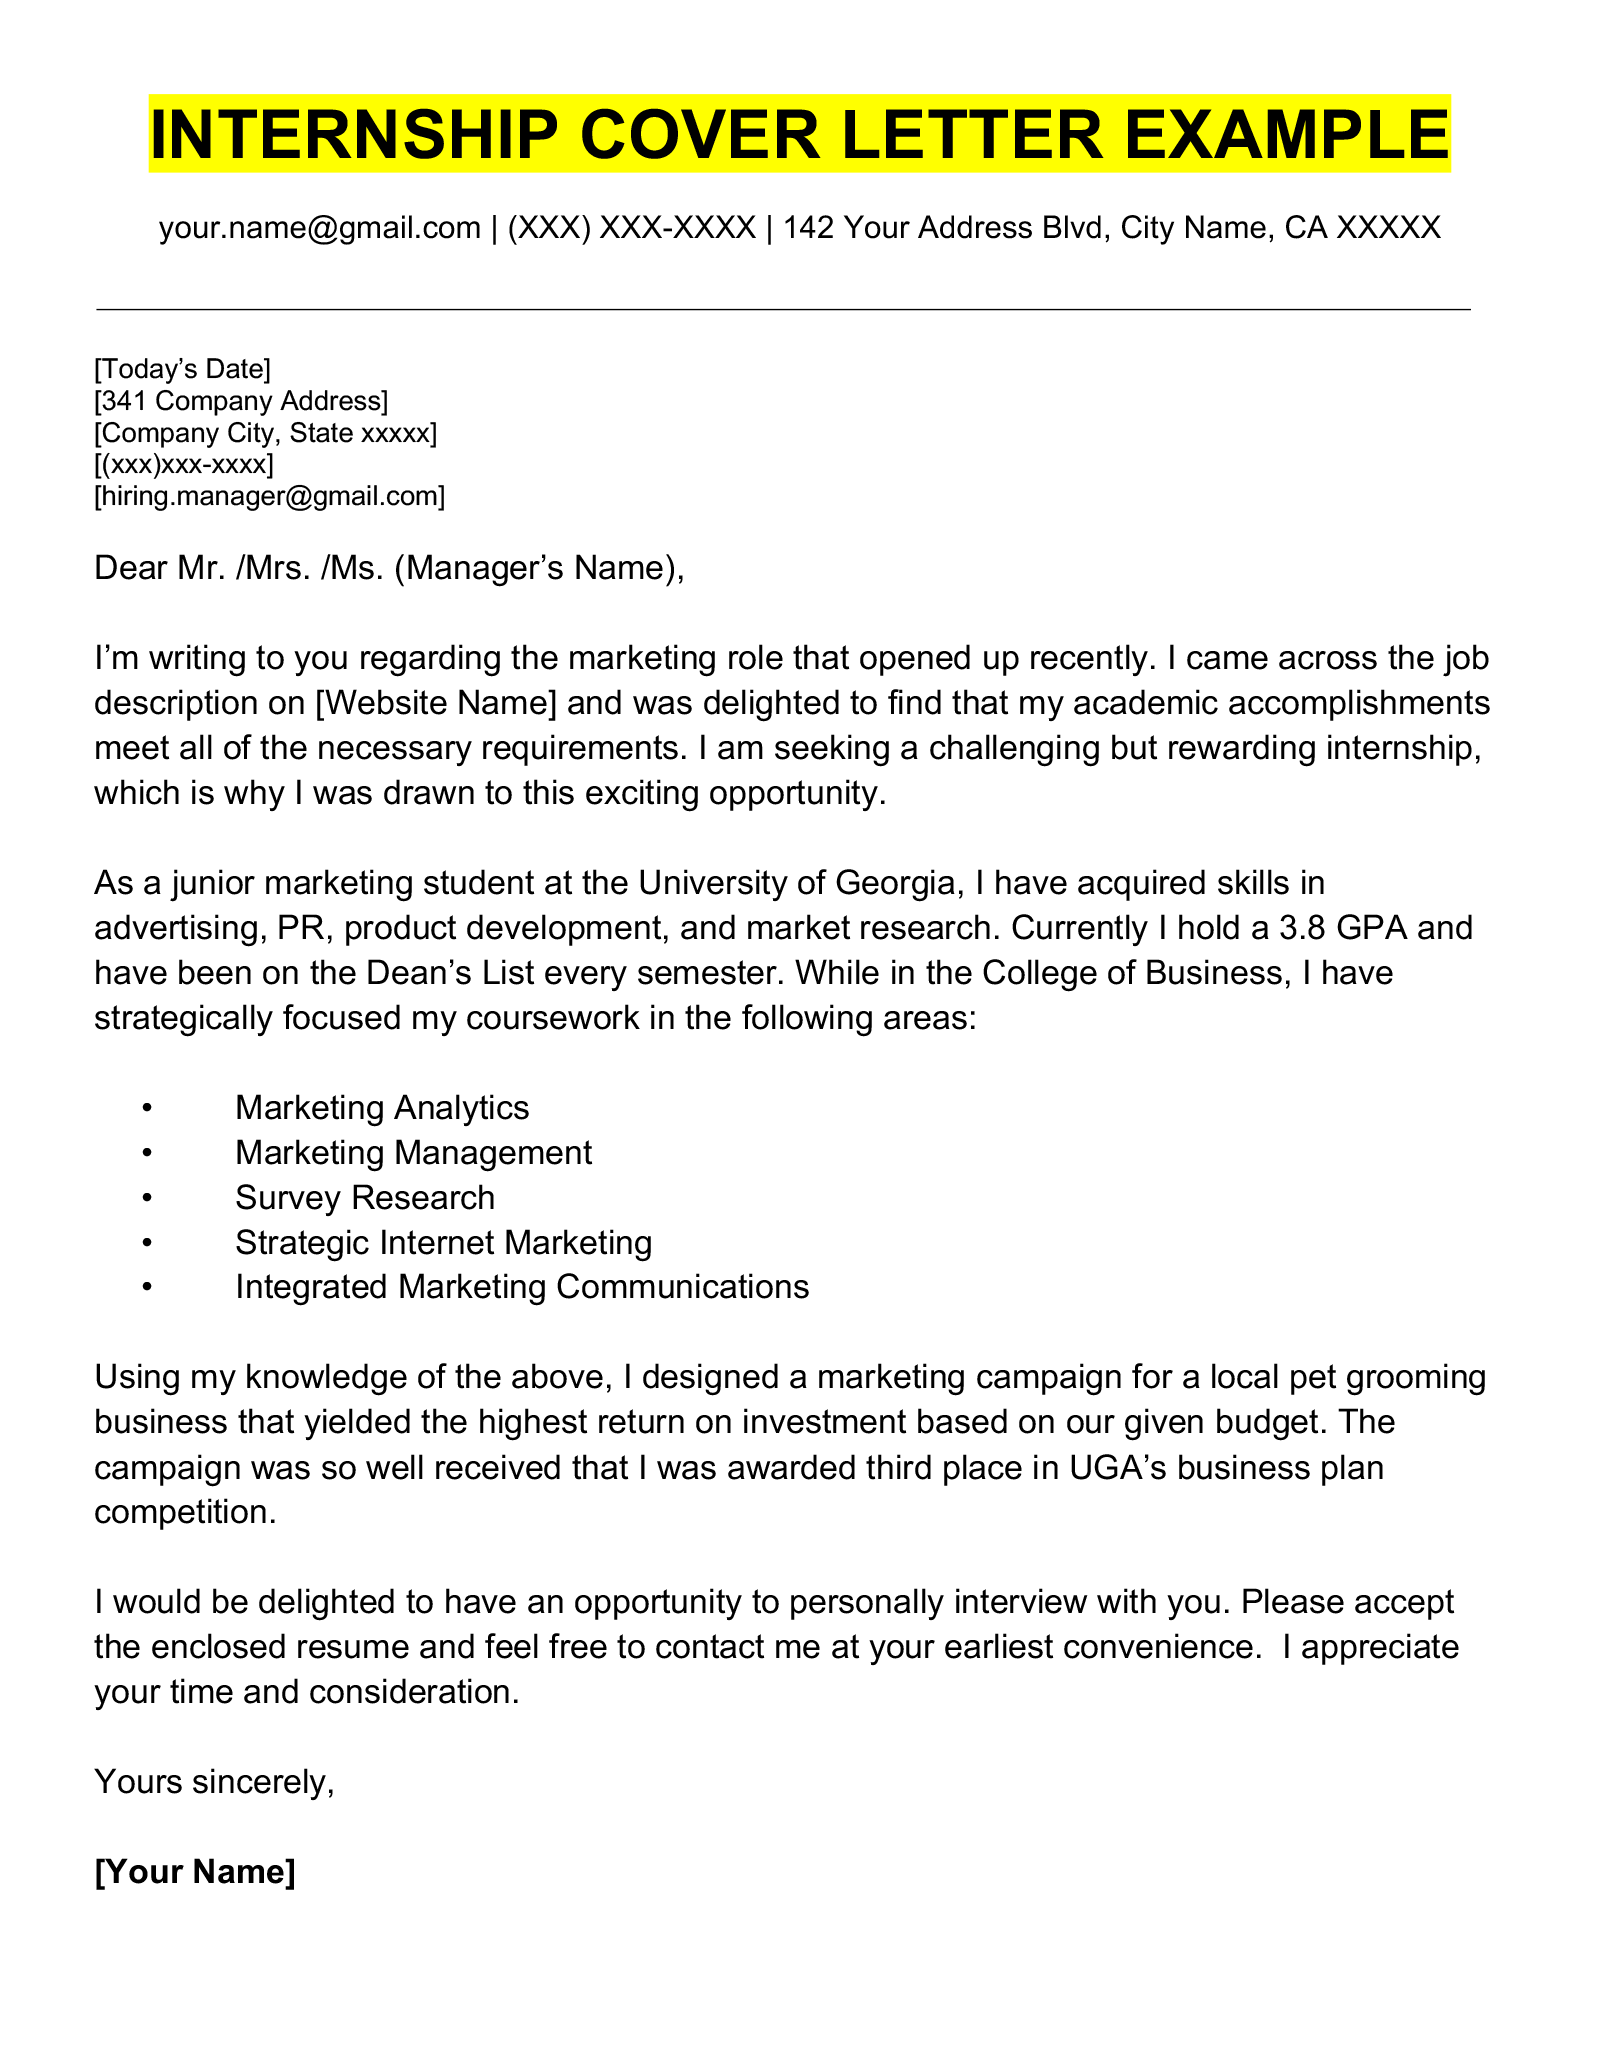 An example of a cover letter for an internship